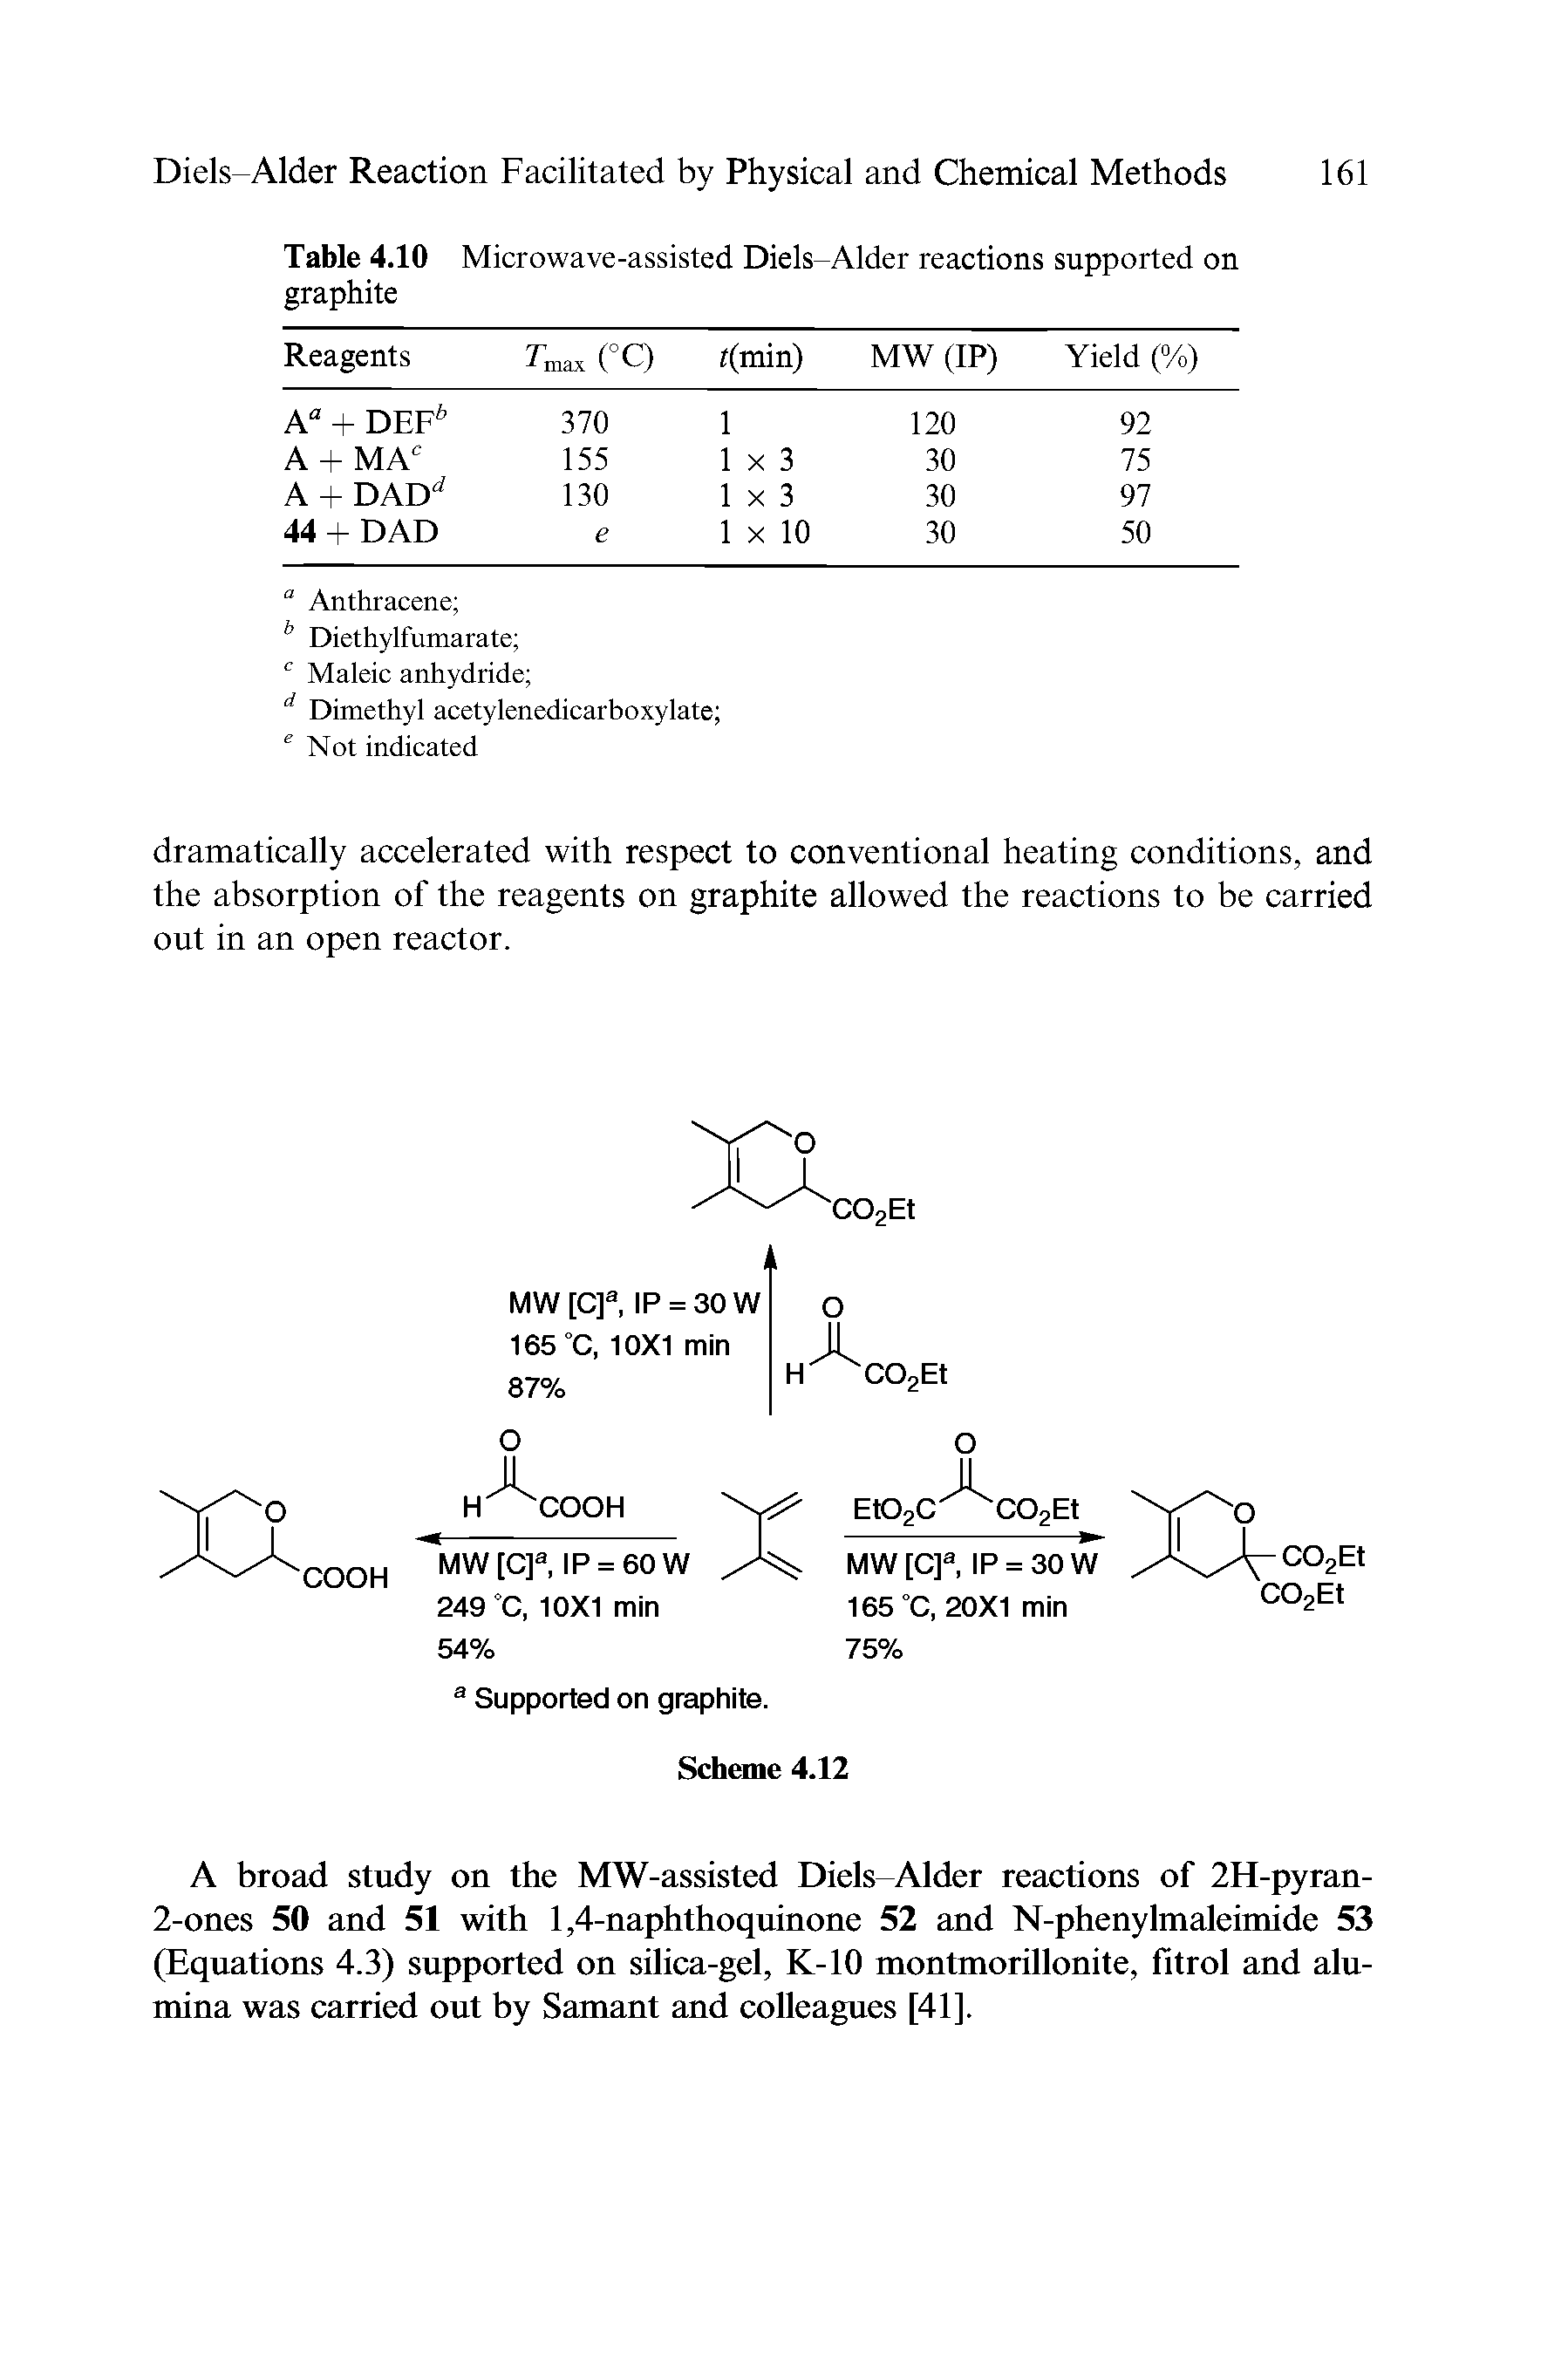 Table 4.10 Microwave-assisted Diels-Alder reactions supported on graphite...